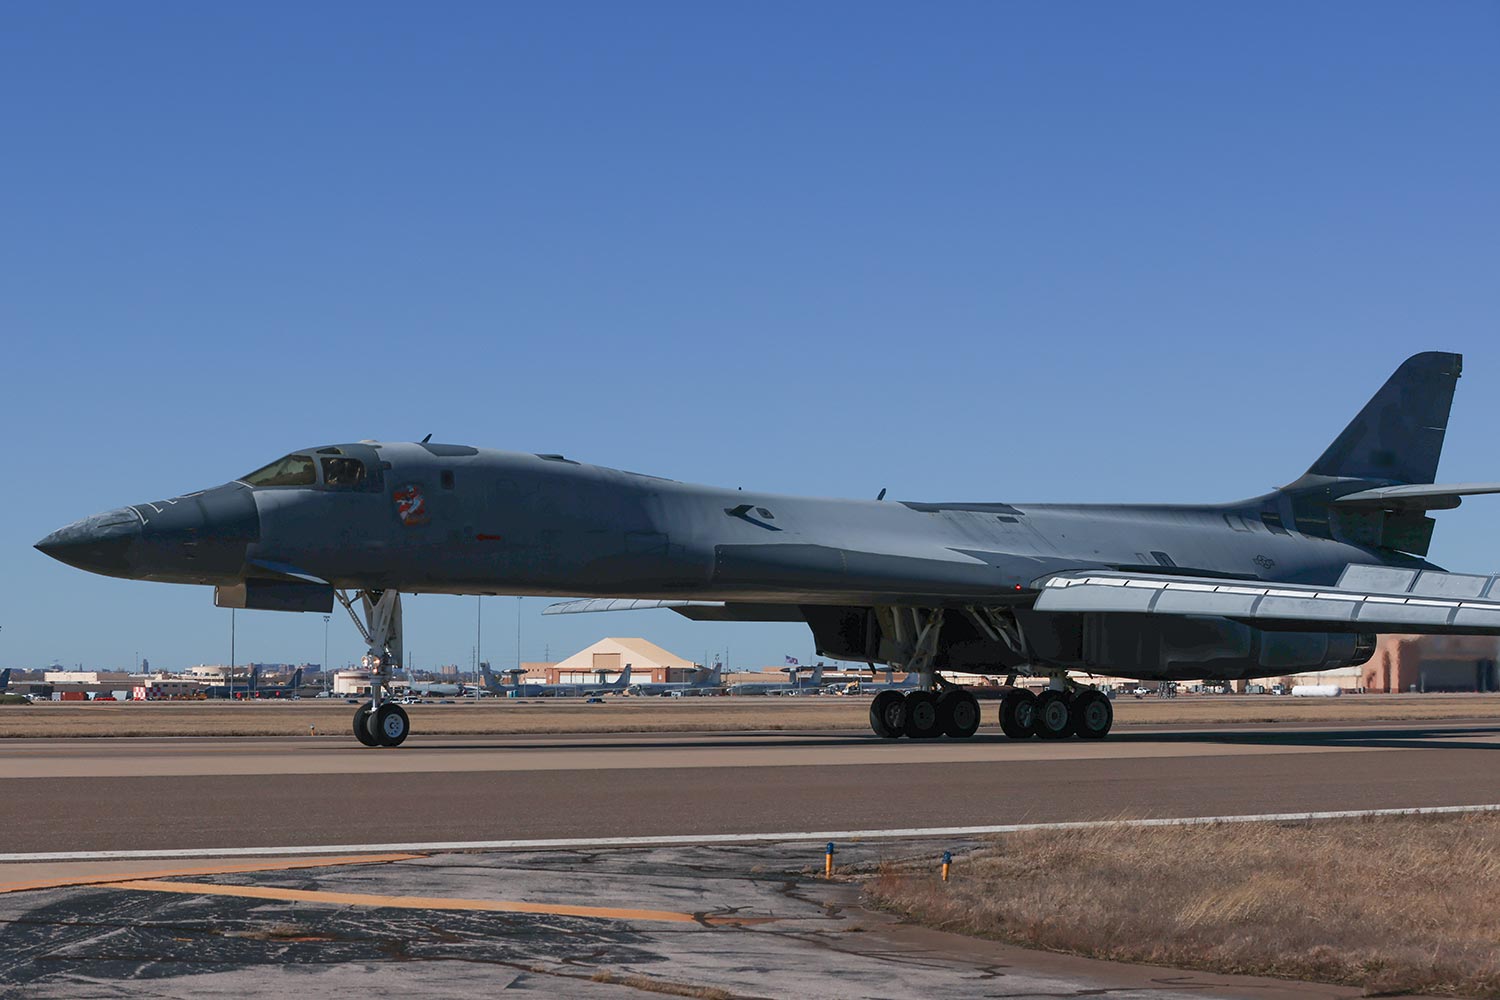 The B-1B Lancer bomber that was restored to flying condition